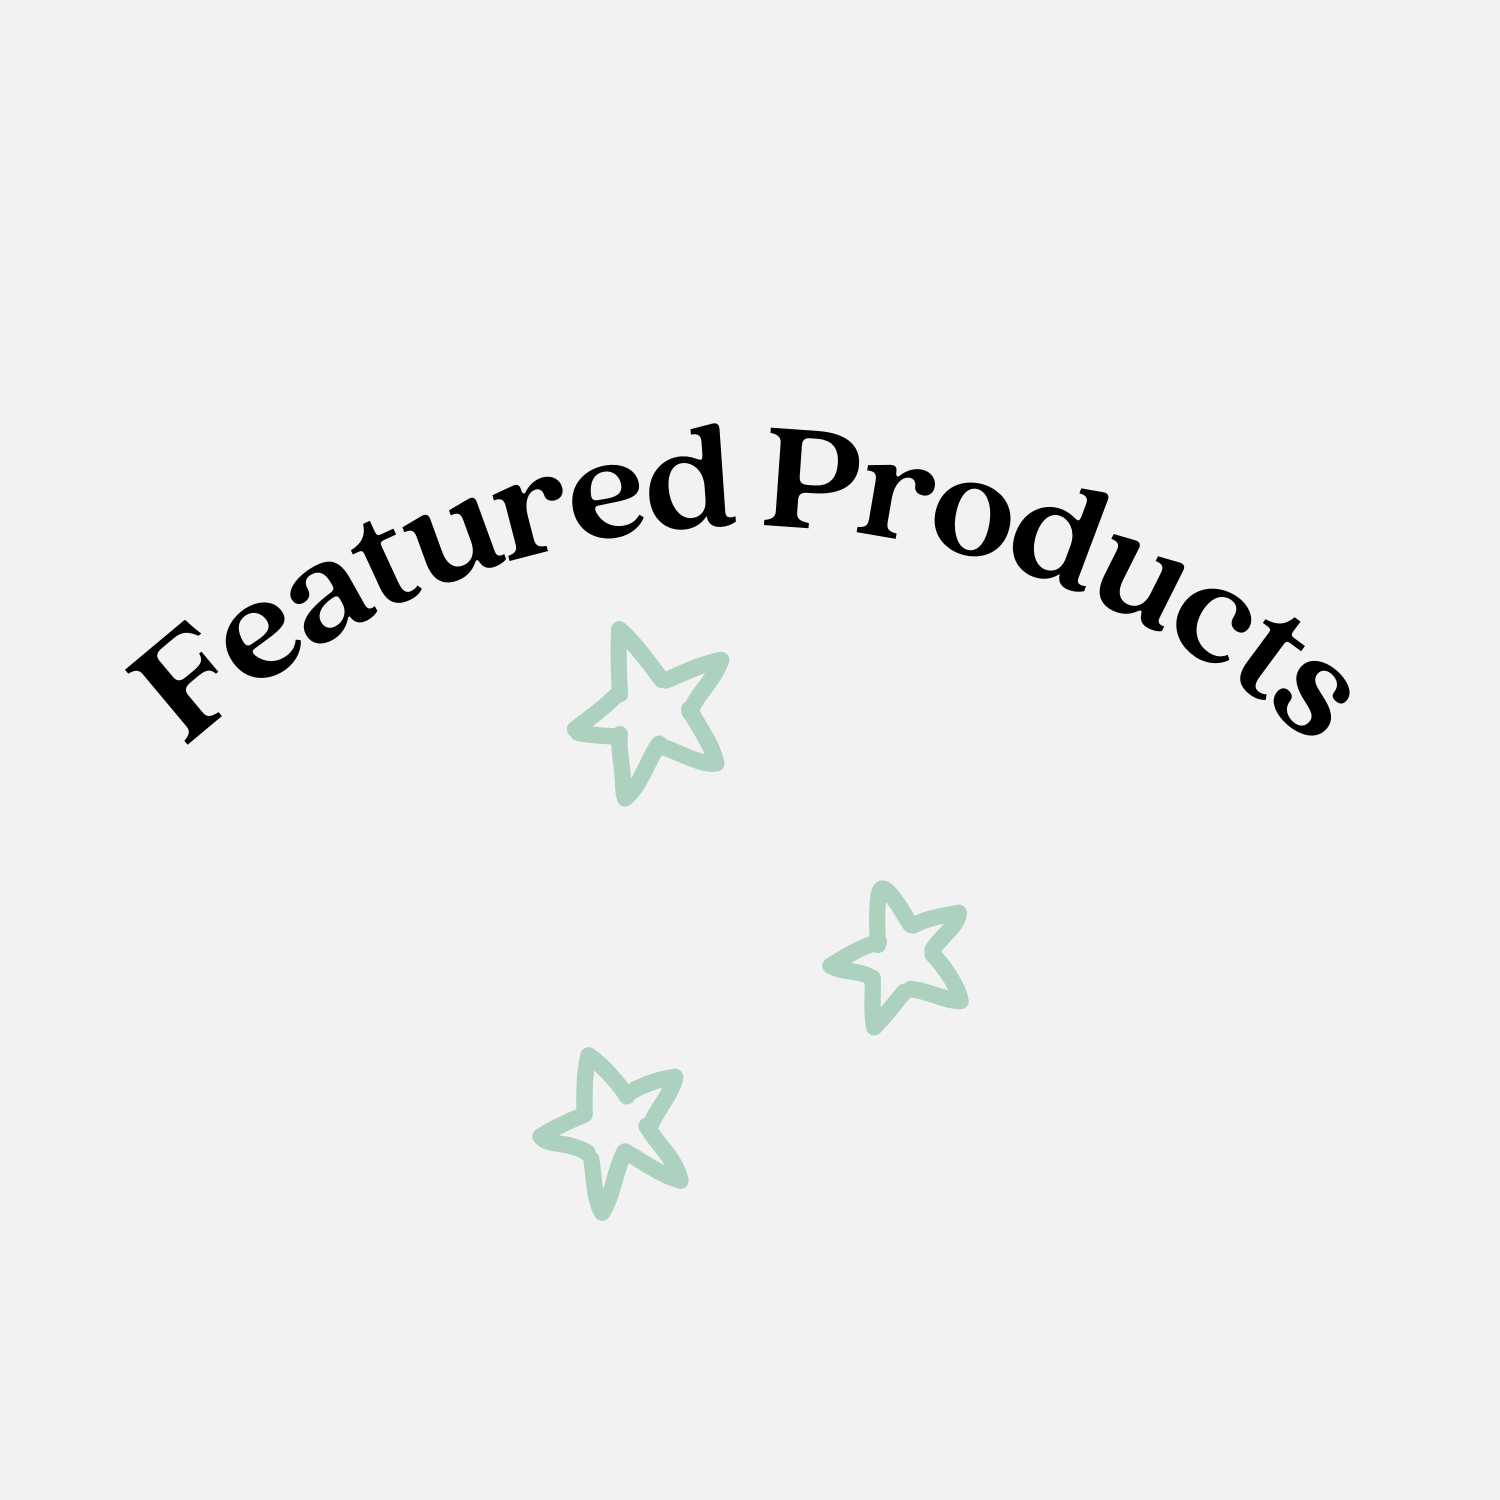 Featured Products